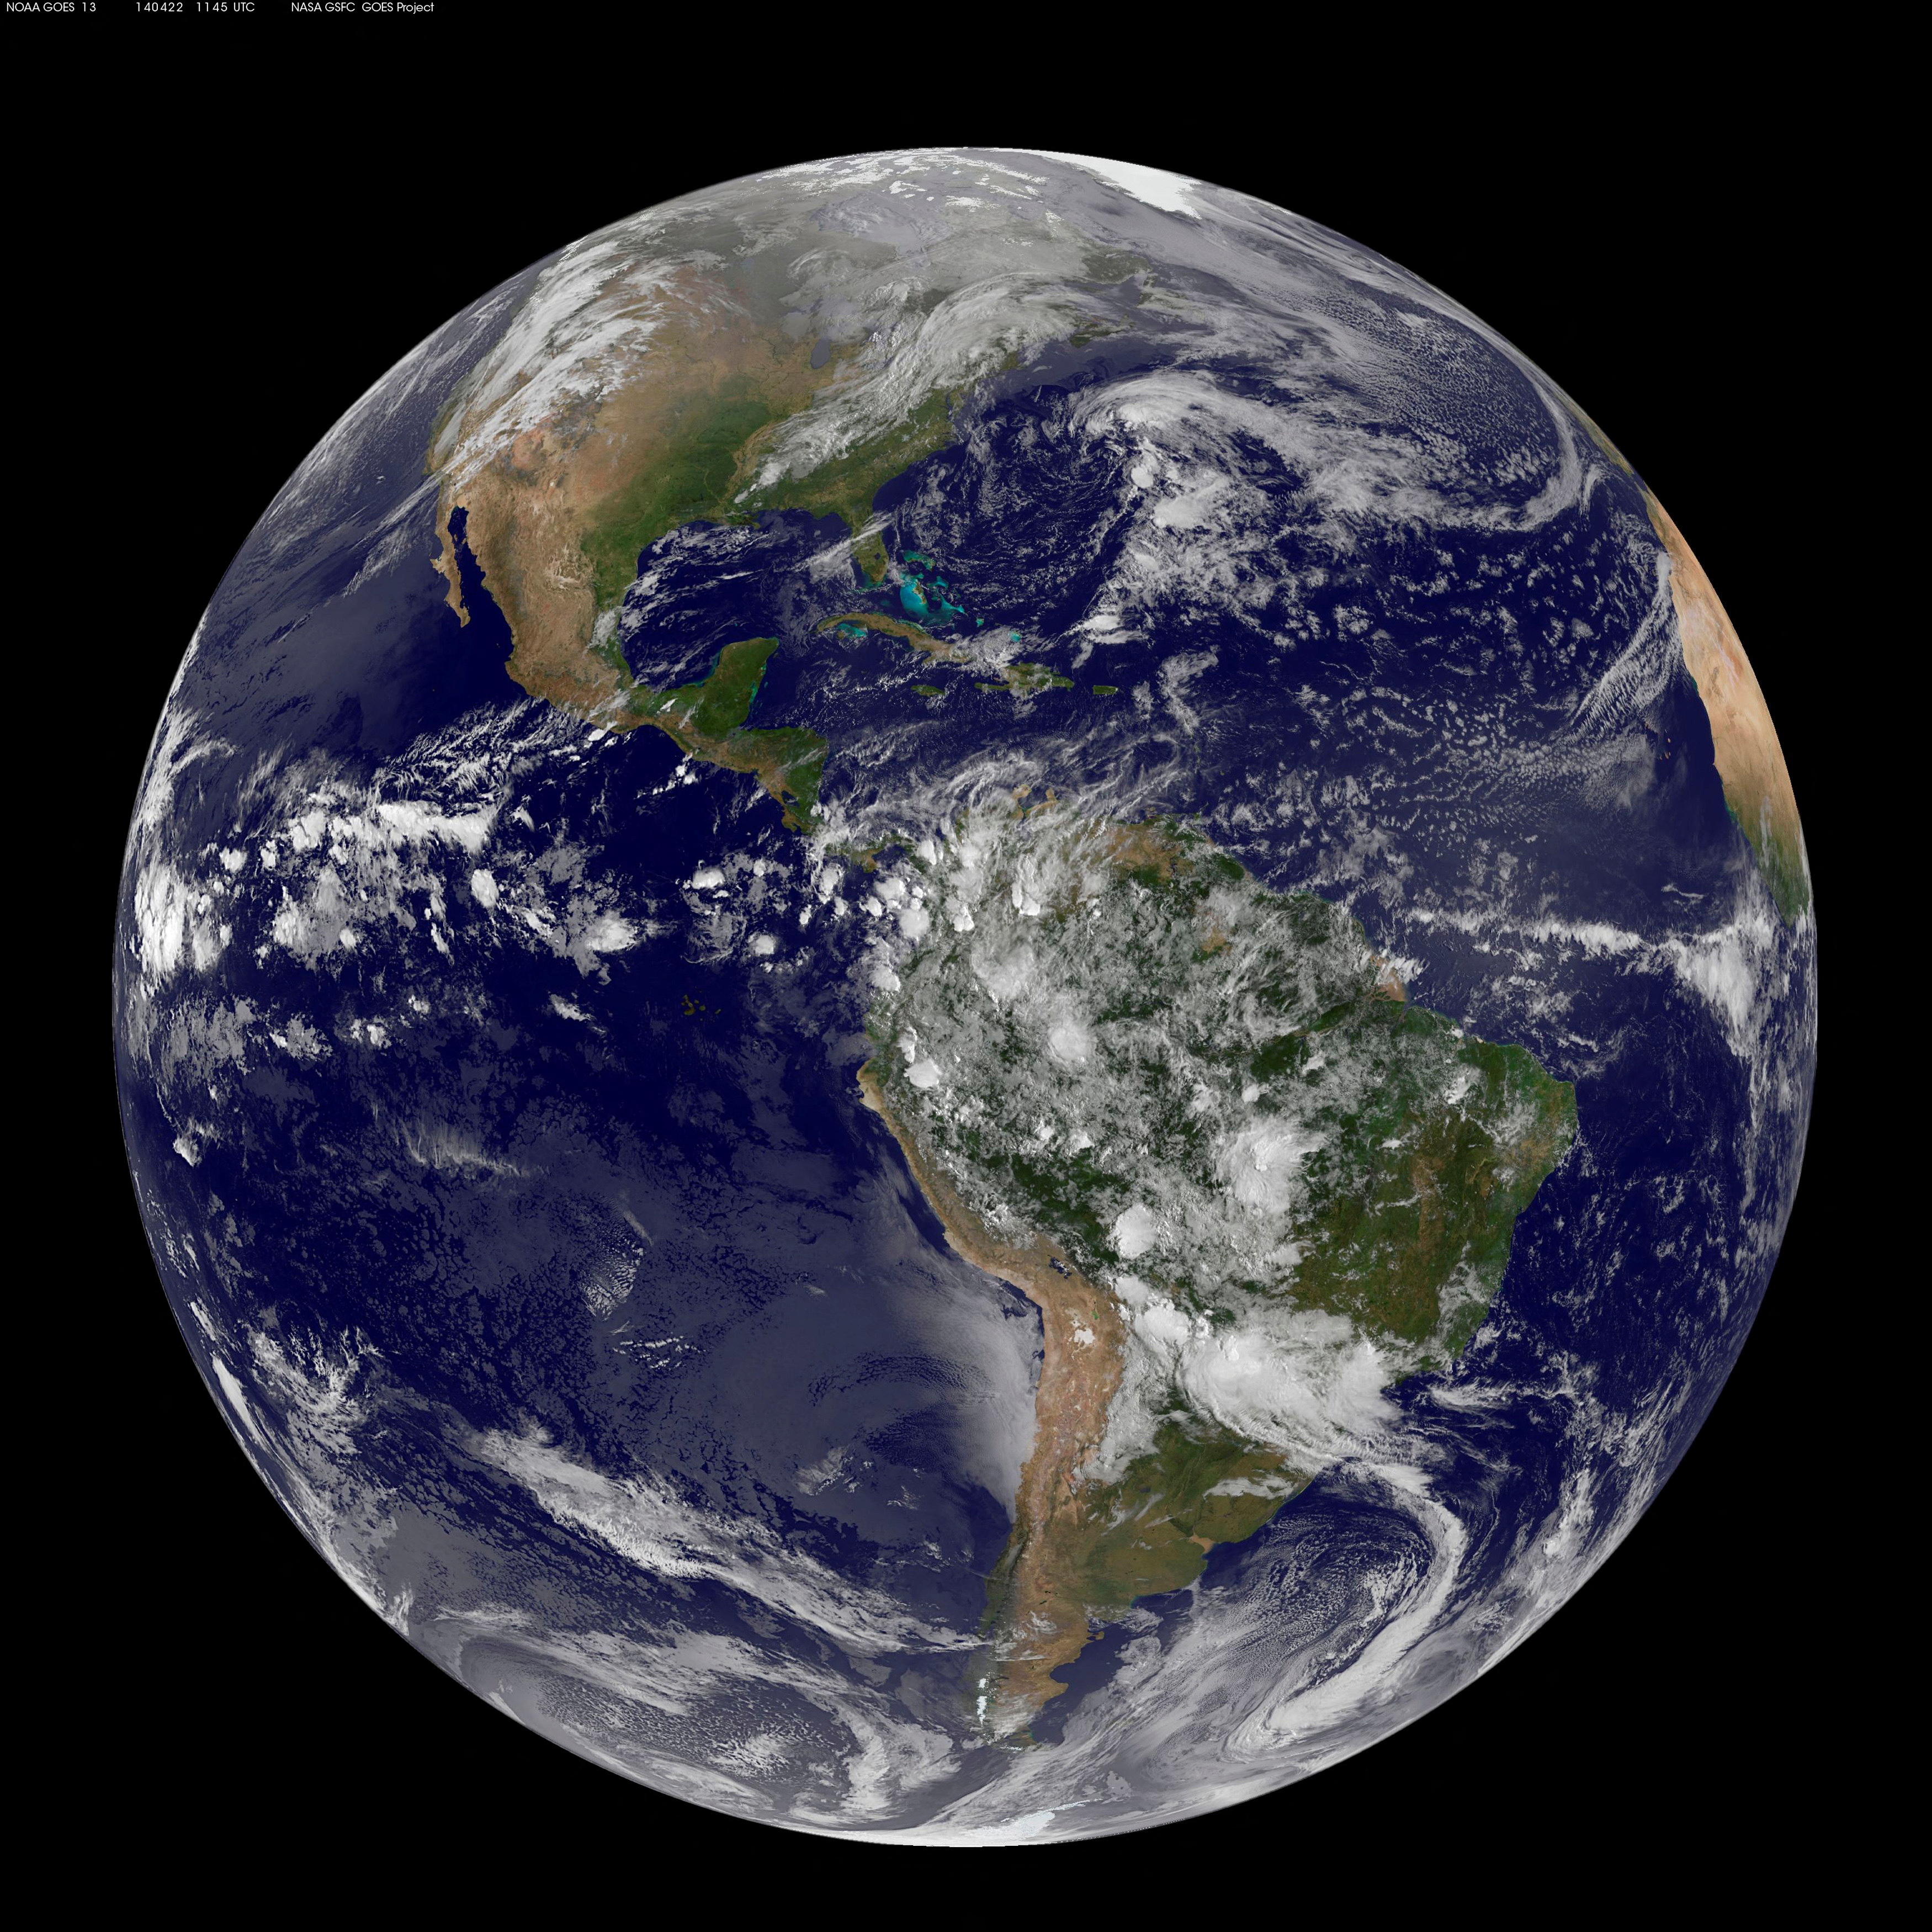 The planet Earth is seen in a photo taken by NOAA's GOES-East satellite on Earth Day